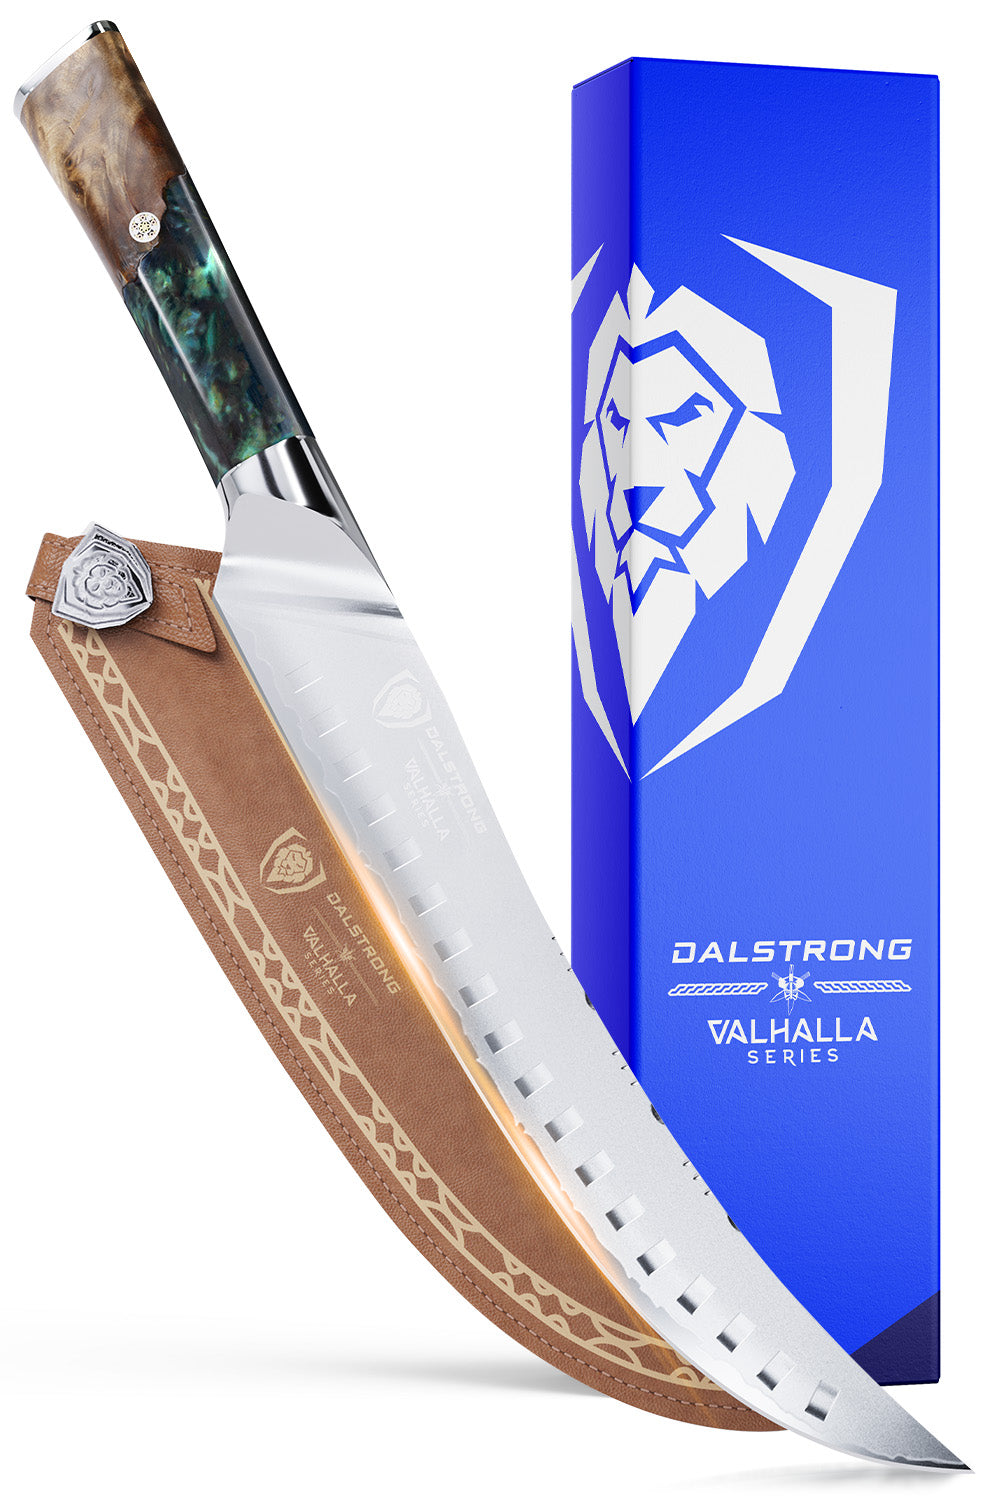 Butcher Knife 10" | Valhalla Series | Dalstrong ©